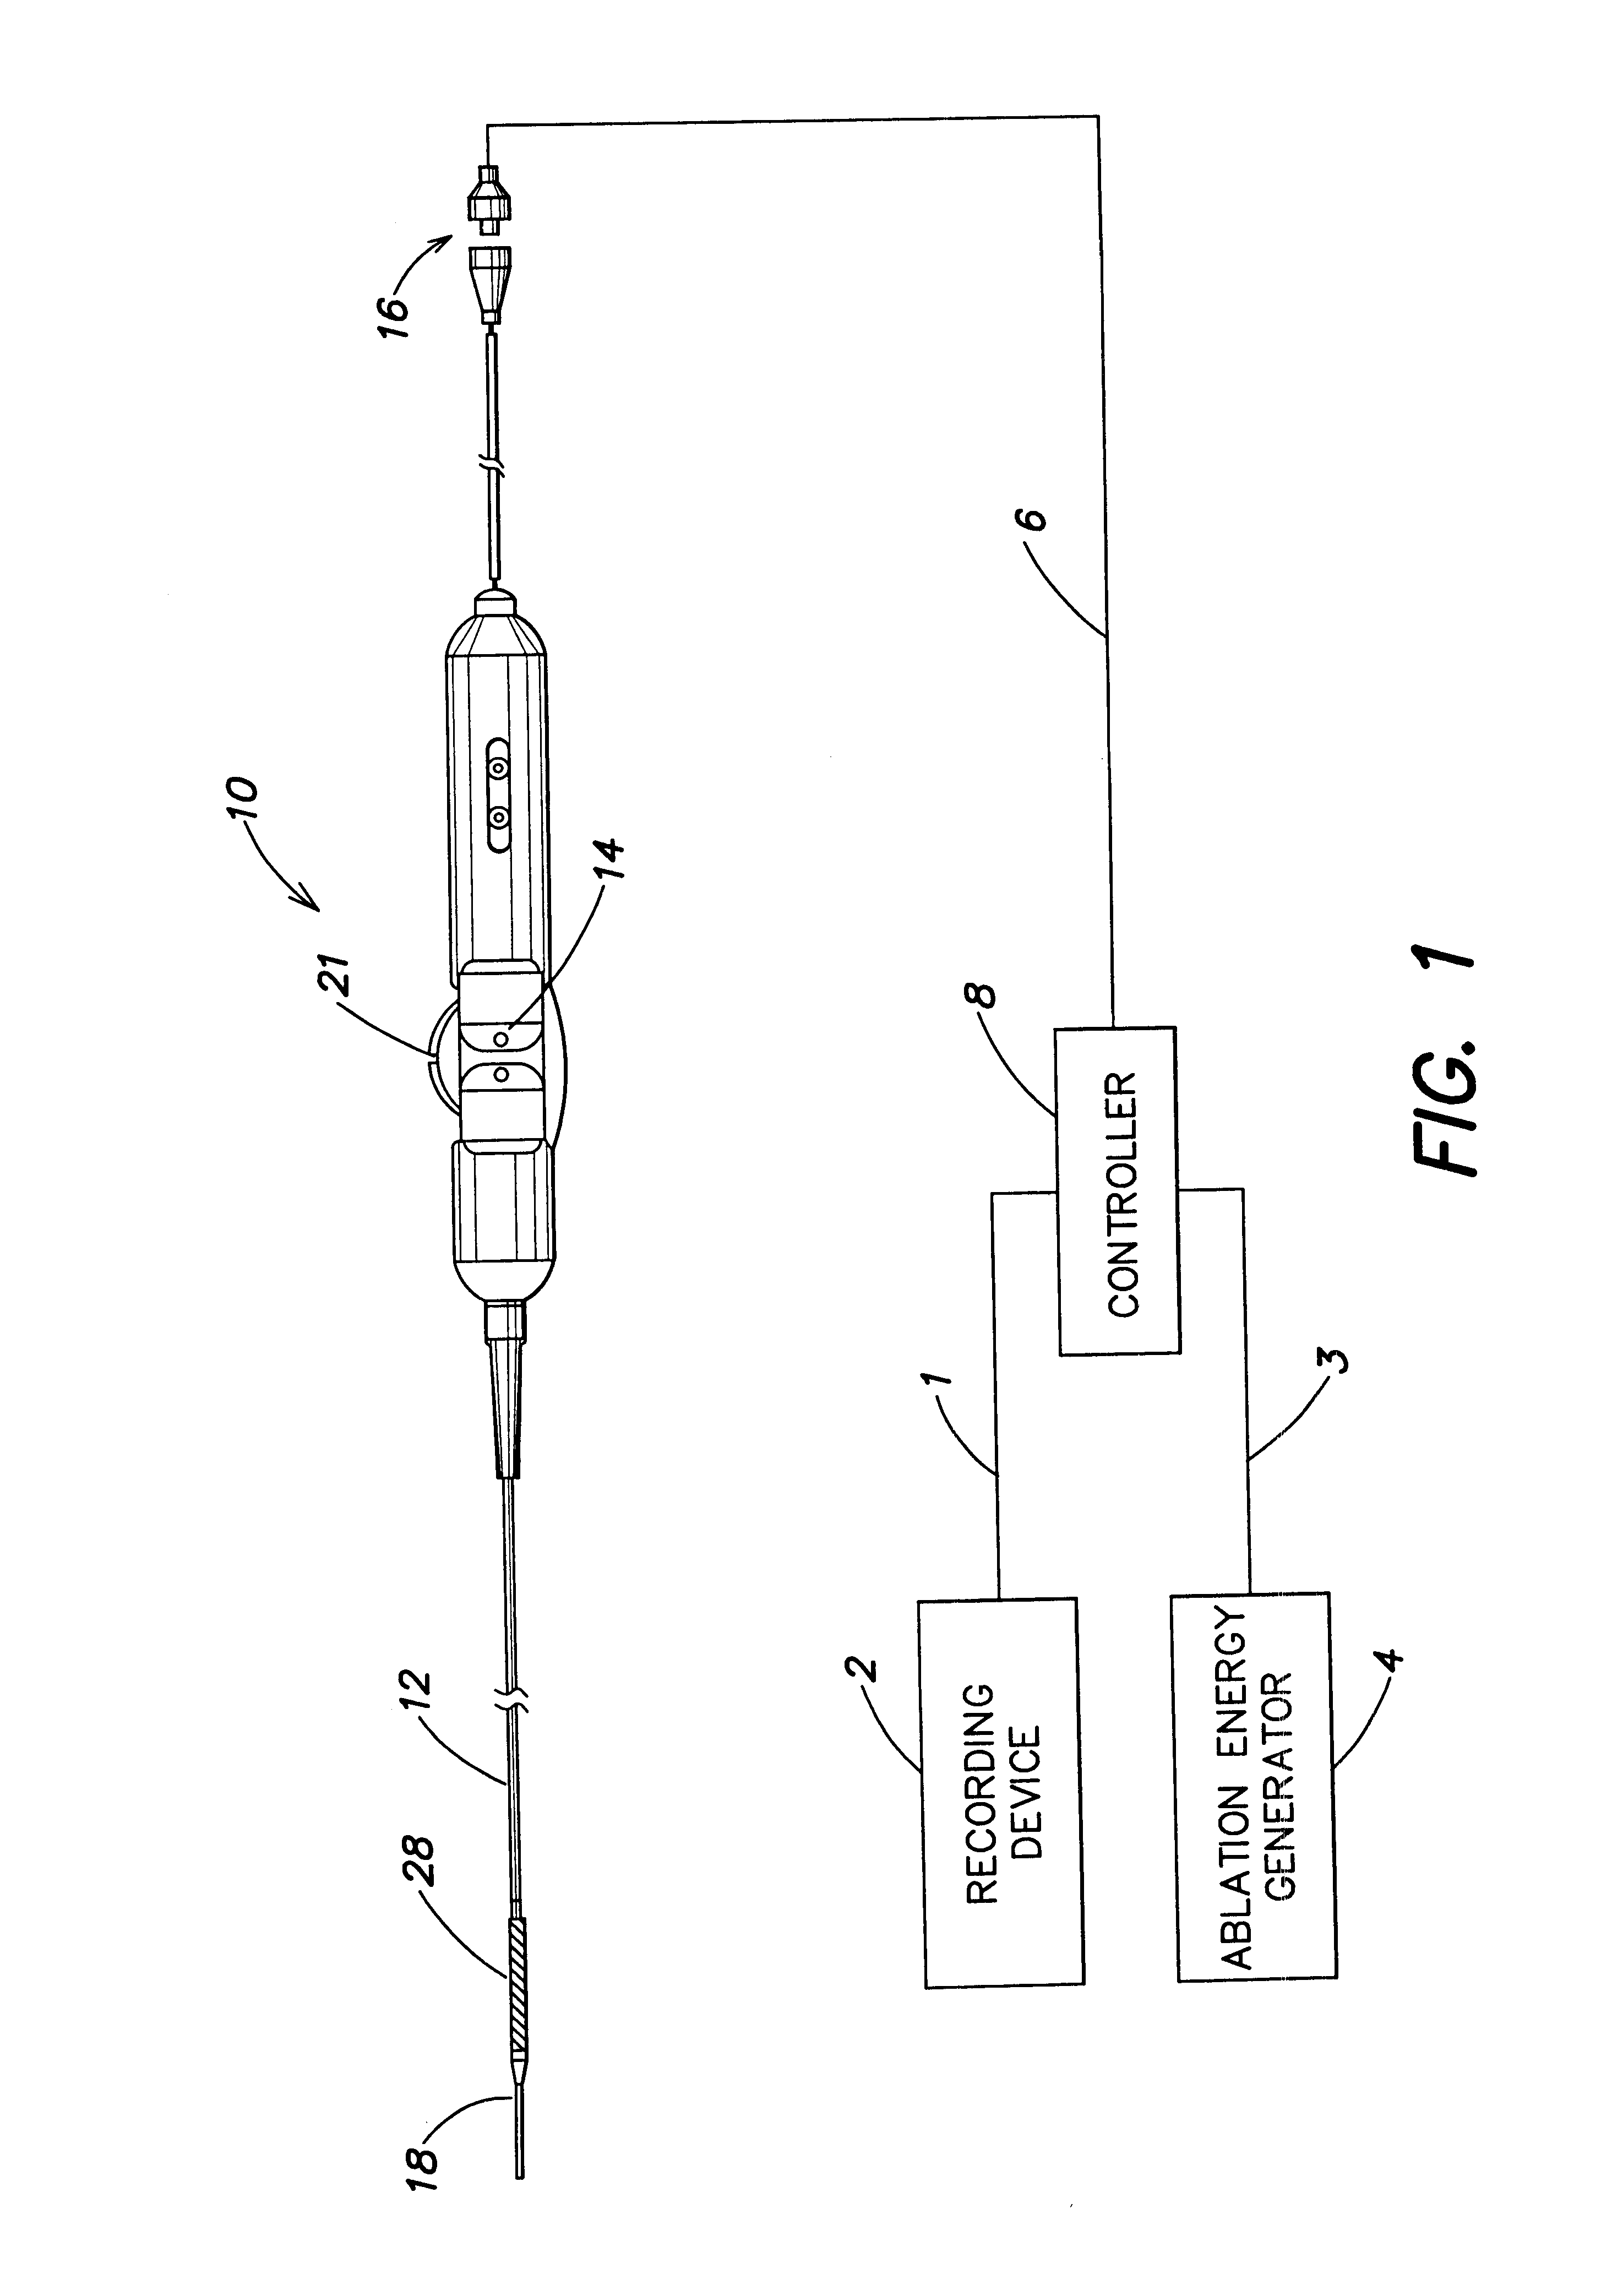 Apparatus and methods for mapping and ablation in electrophysiology procedures